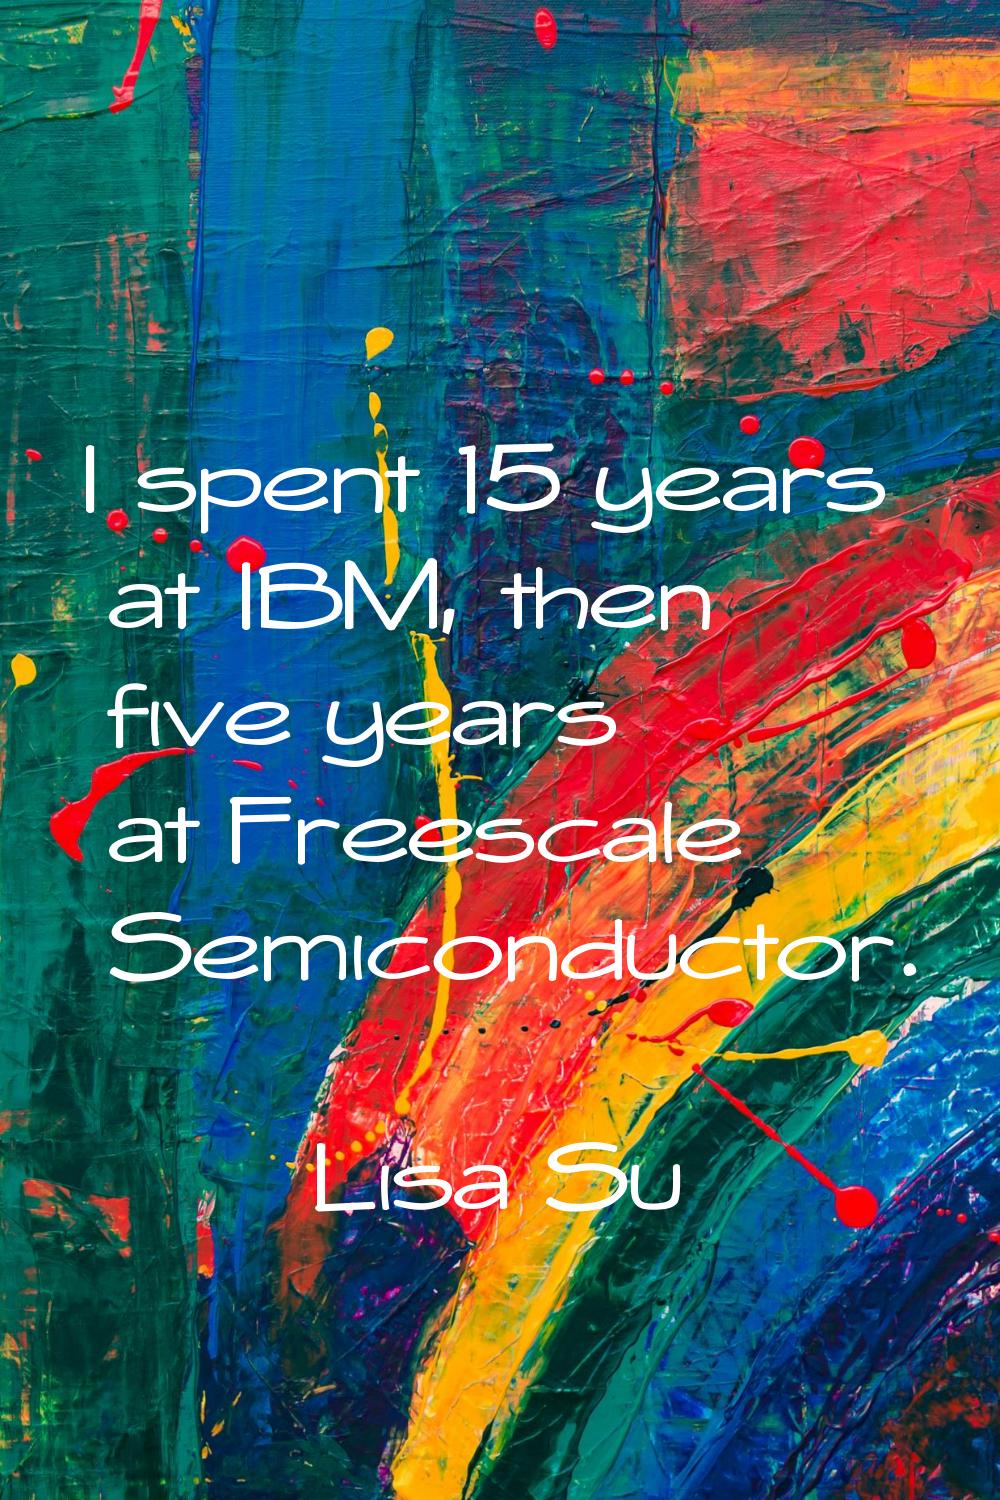 I spent 15 years at IBM, then five years at Freescale Semiconductor.